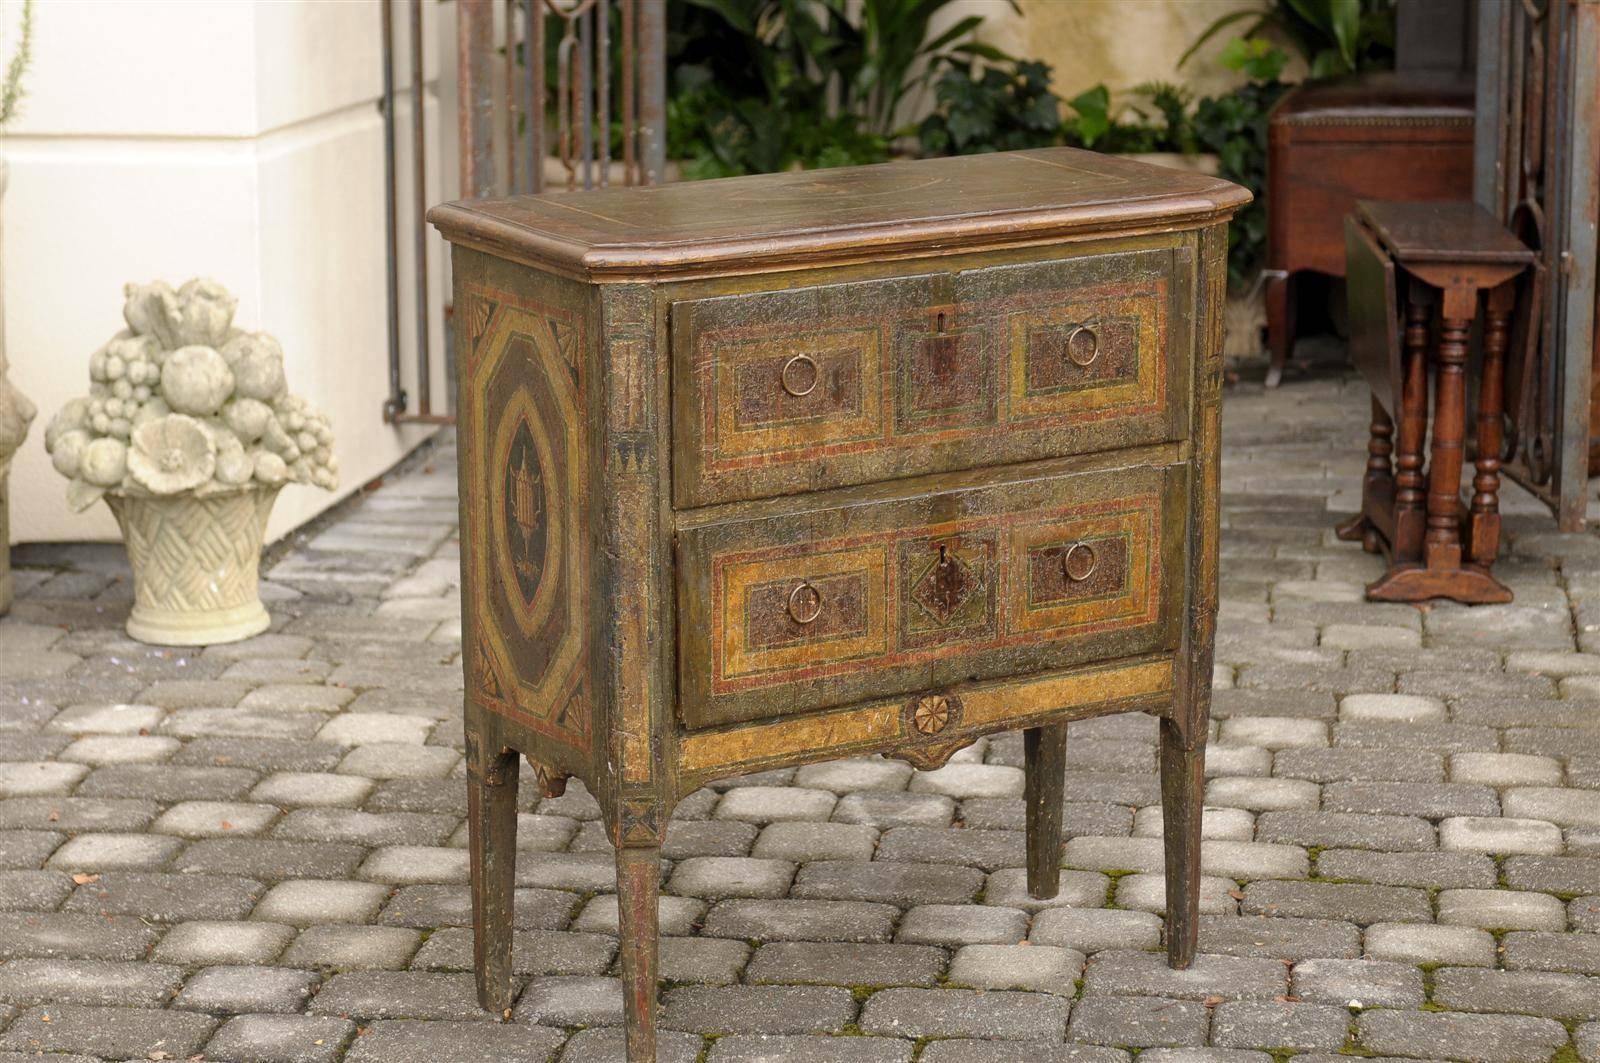 This Italian small painted commode from the very early 19th century features a rectangular top with angled front sides over two drawers. The green and brown top is decorated with a painted urn motif in the center. The exquisite sides echo this urn